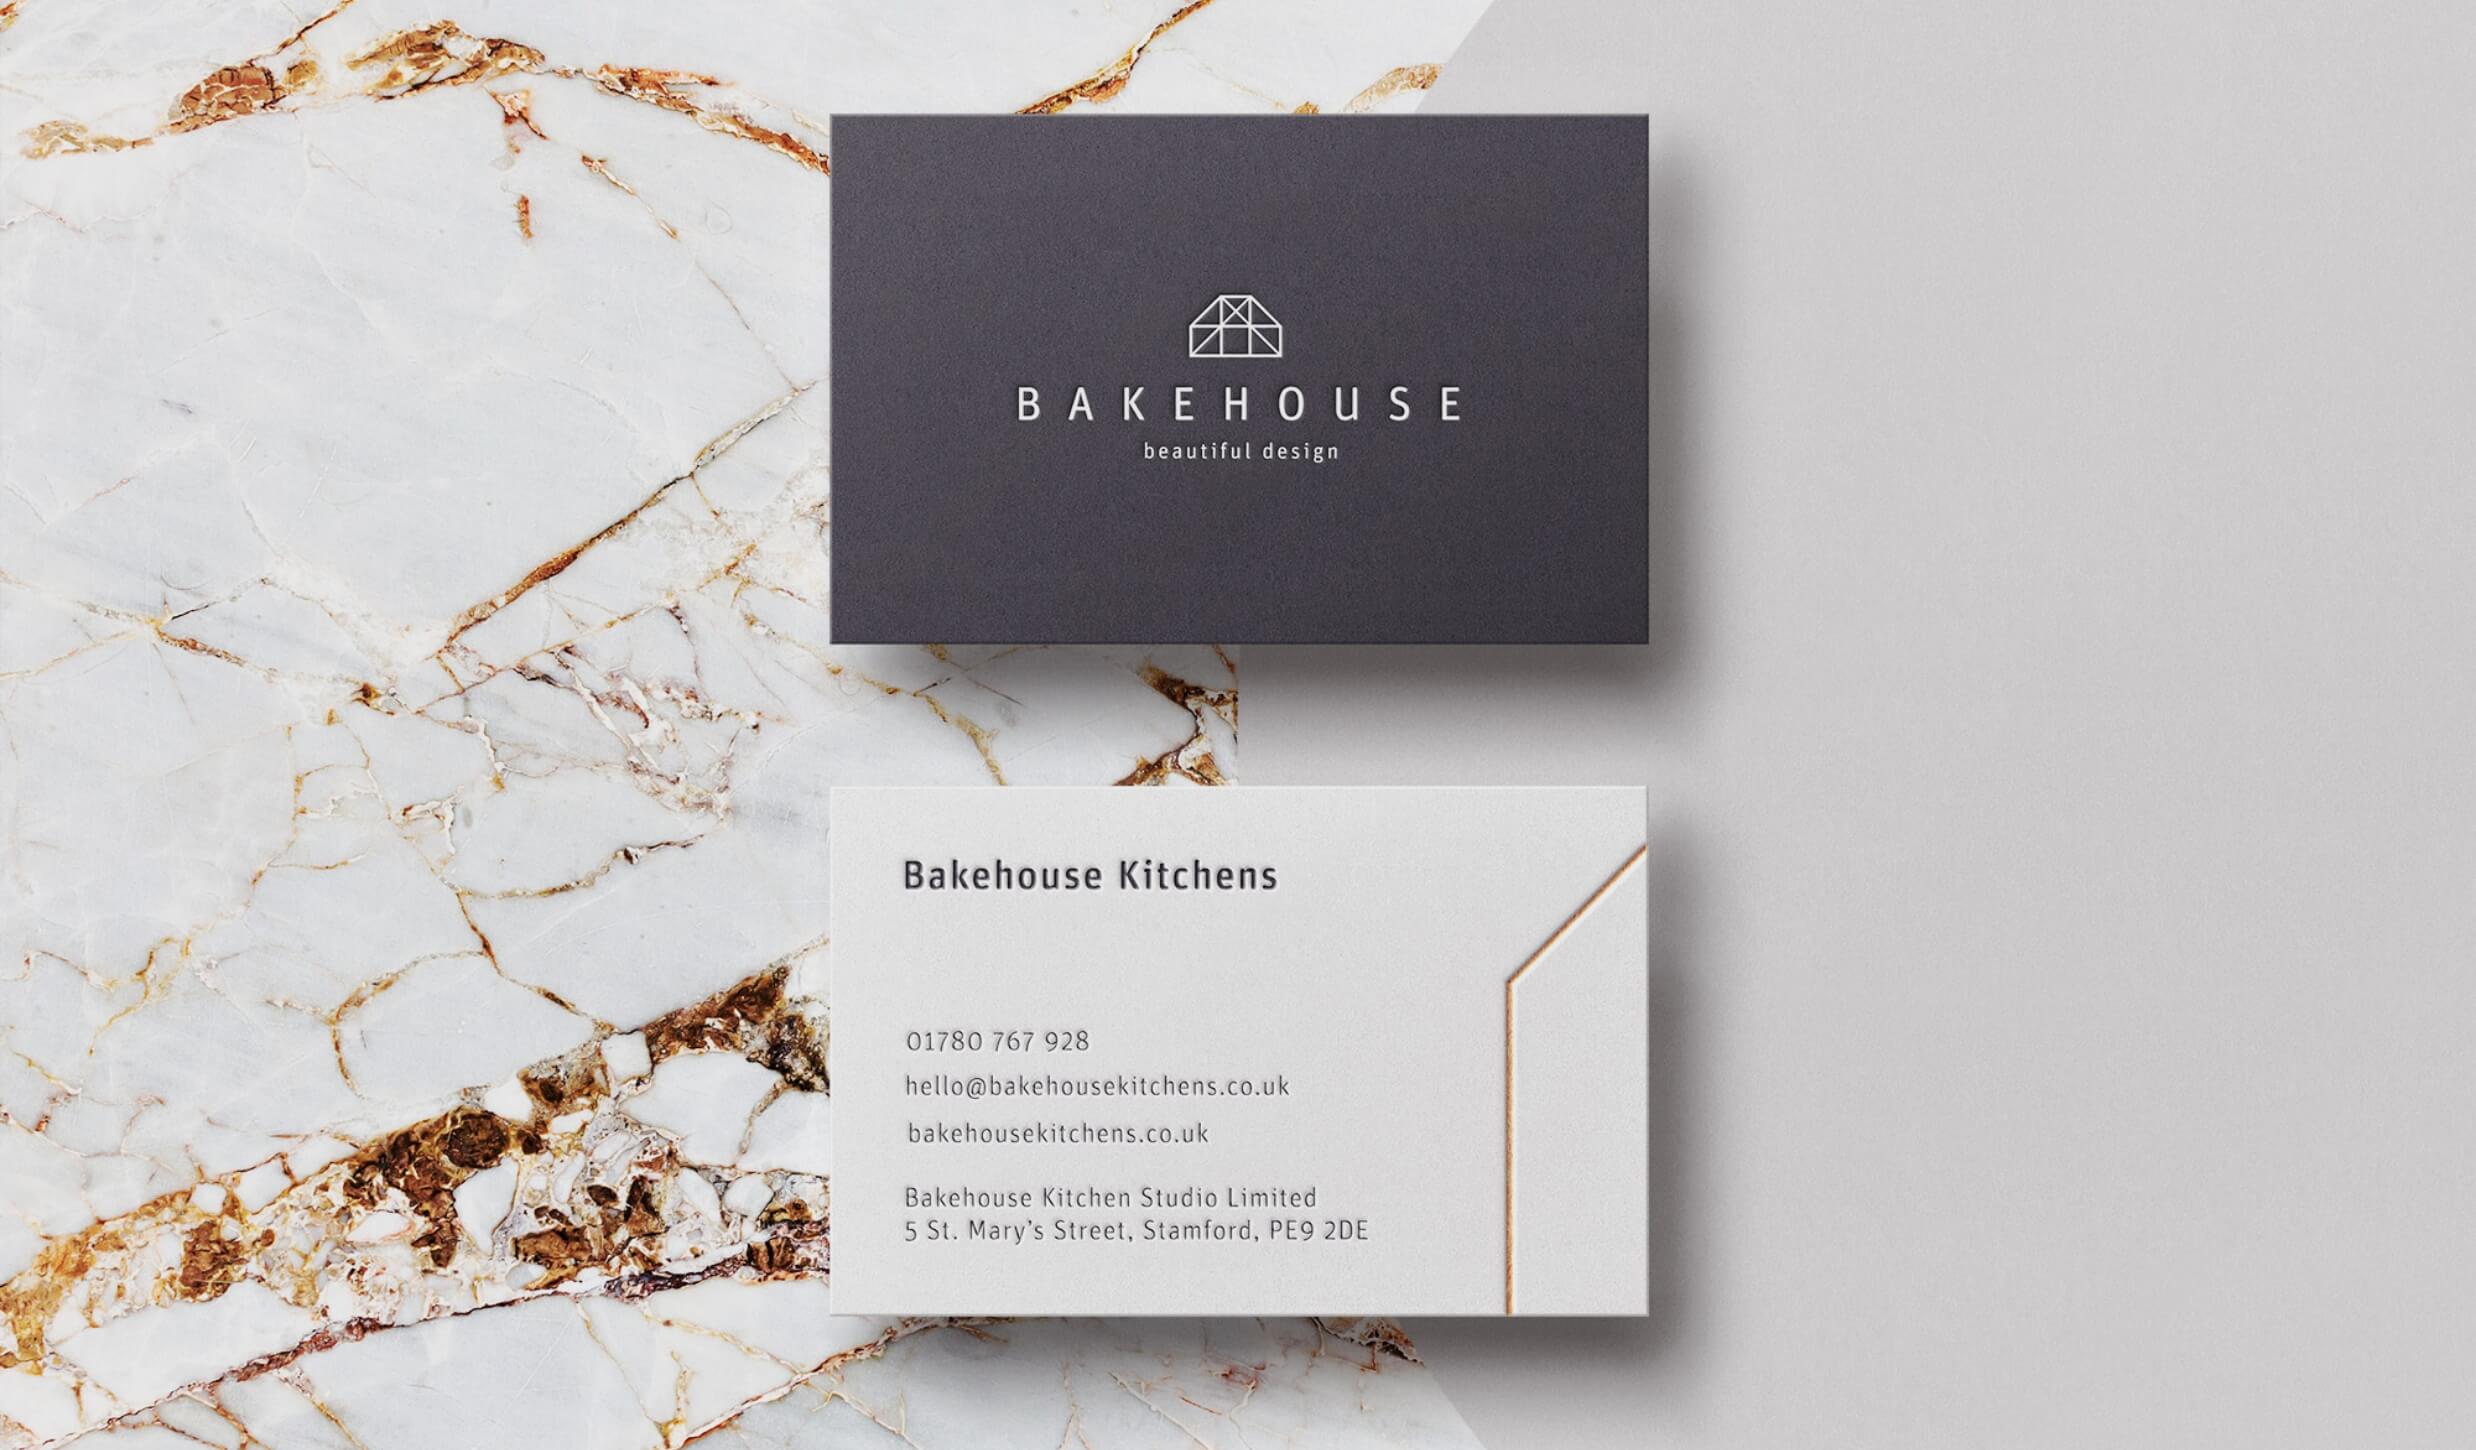 Business cards for luxury kitchen brand Bakehouse Kitchens